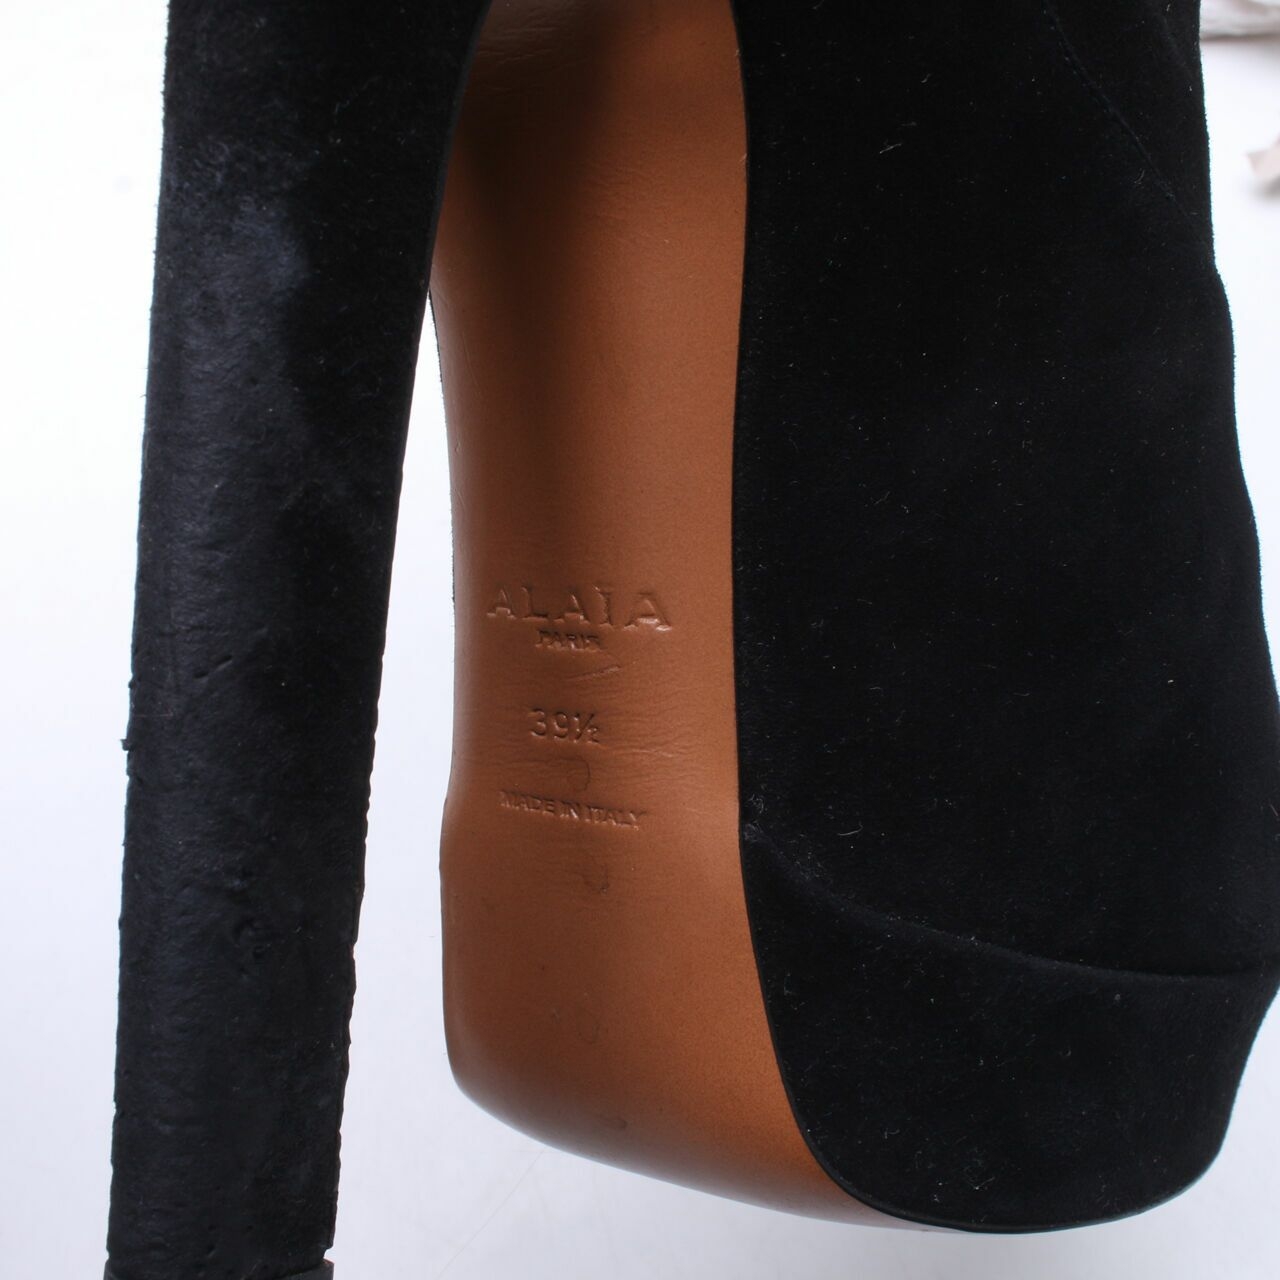 Alaia Black Suede Ankle Boots